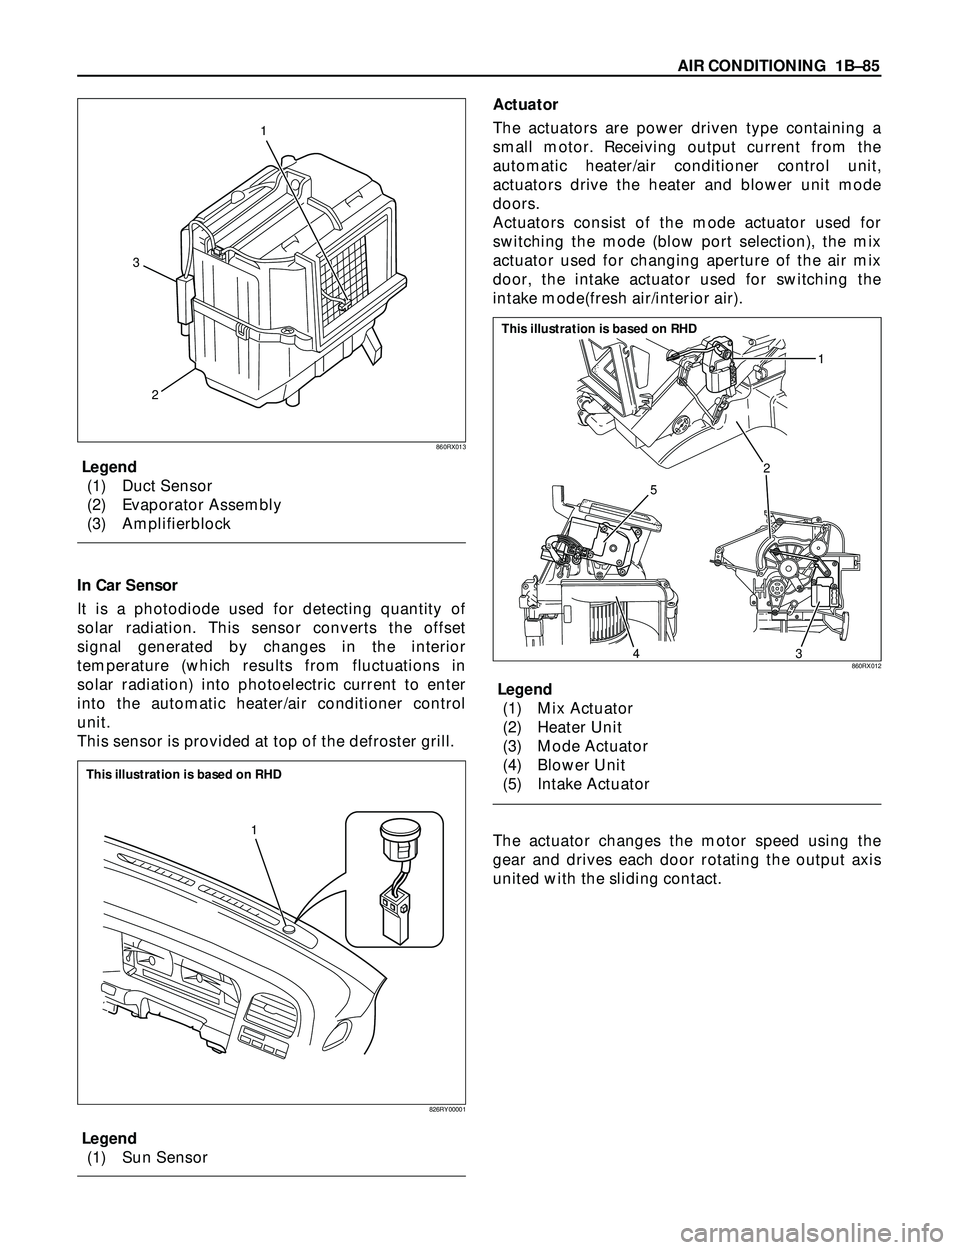 ISUZU TROOPER 1998  Service Repair Manual AIR CONDITIONING  1BÐ85
Legend
(1) Duct Sensor
(2) Evaporator Assembly
(3) Amplifierblock
In Car Sensor
It is a photodiode used for detecting quantity of
solar radiation. This sensor converts the off